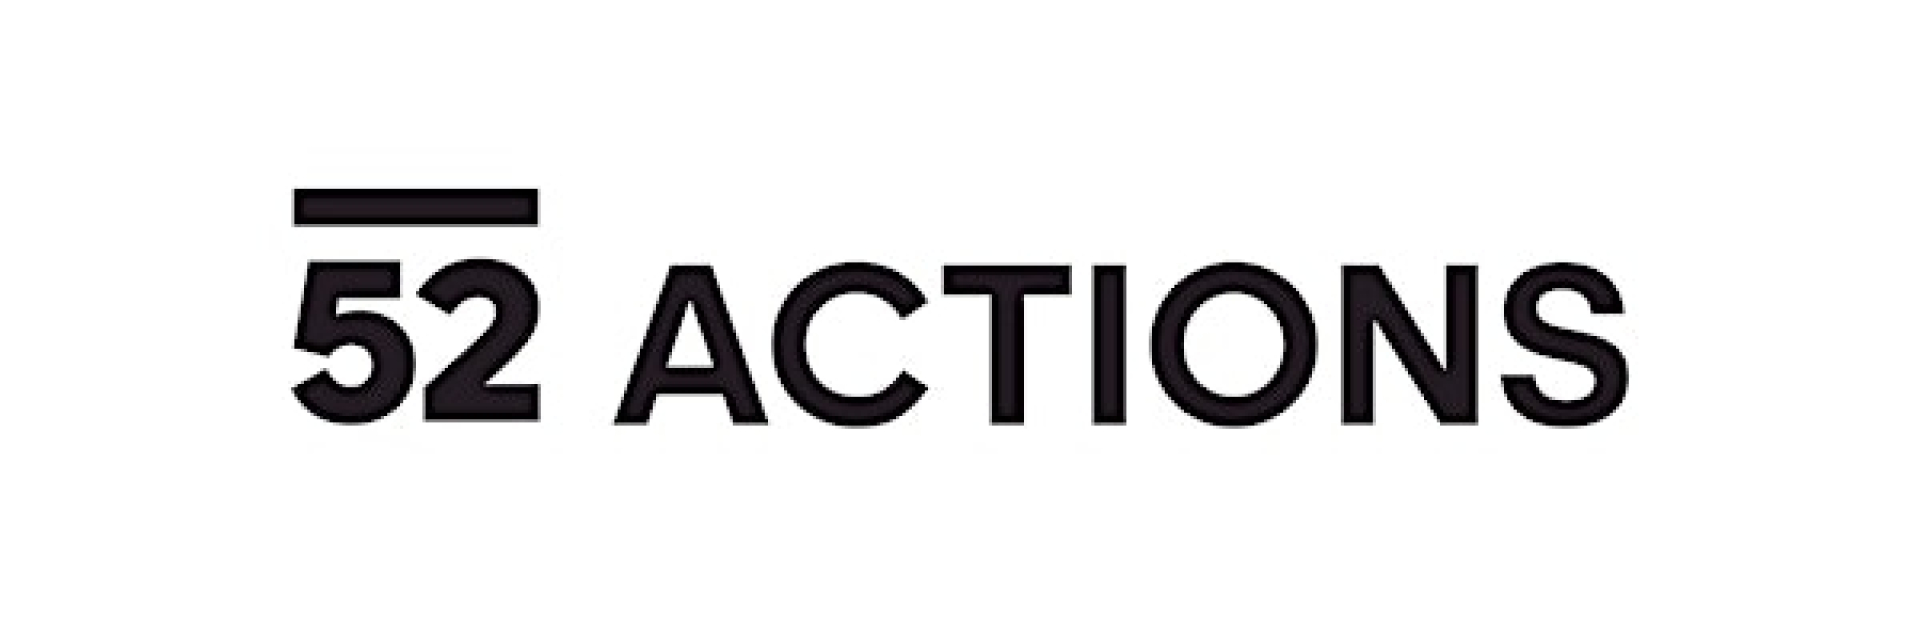 Performance | Practice Practise meets '52 ACTIONS'